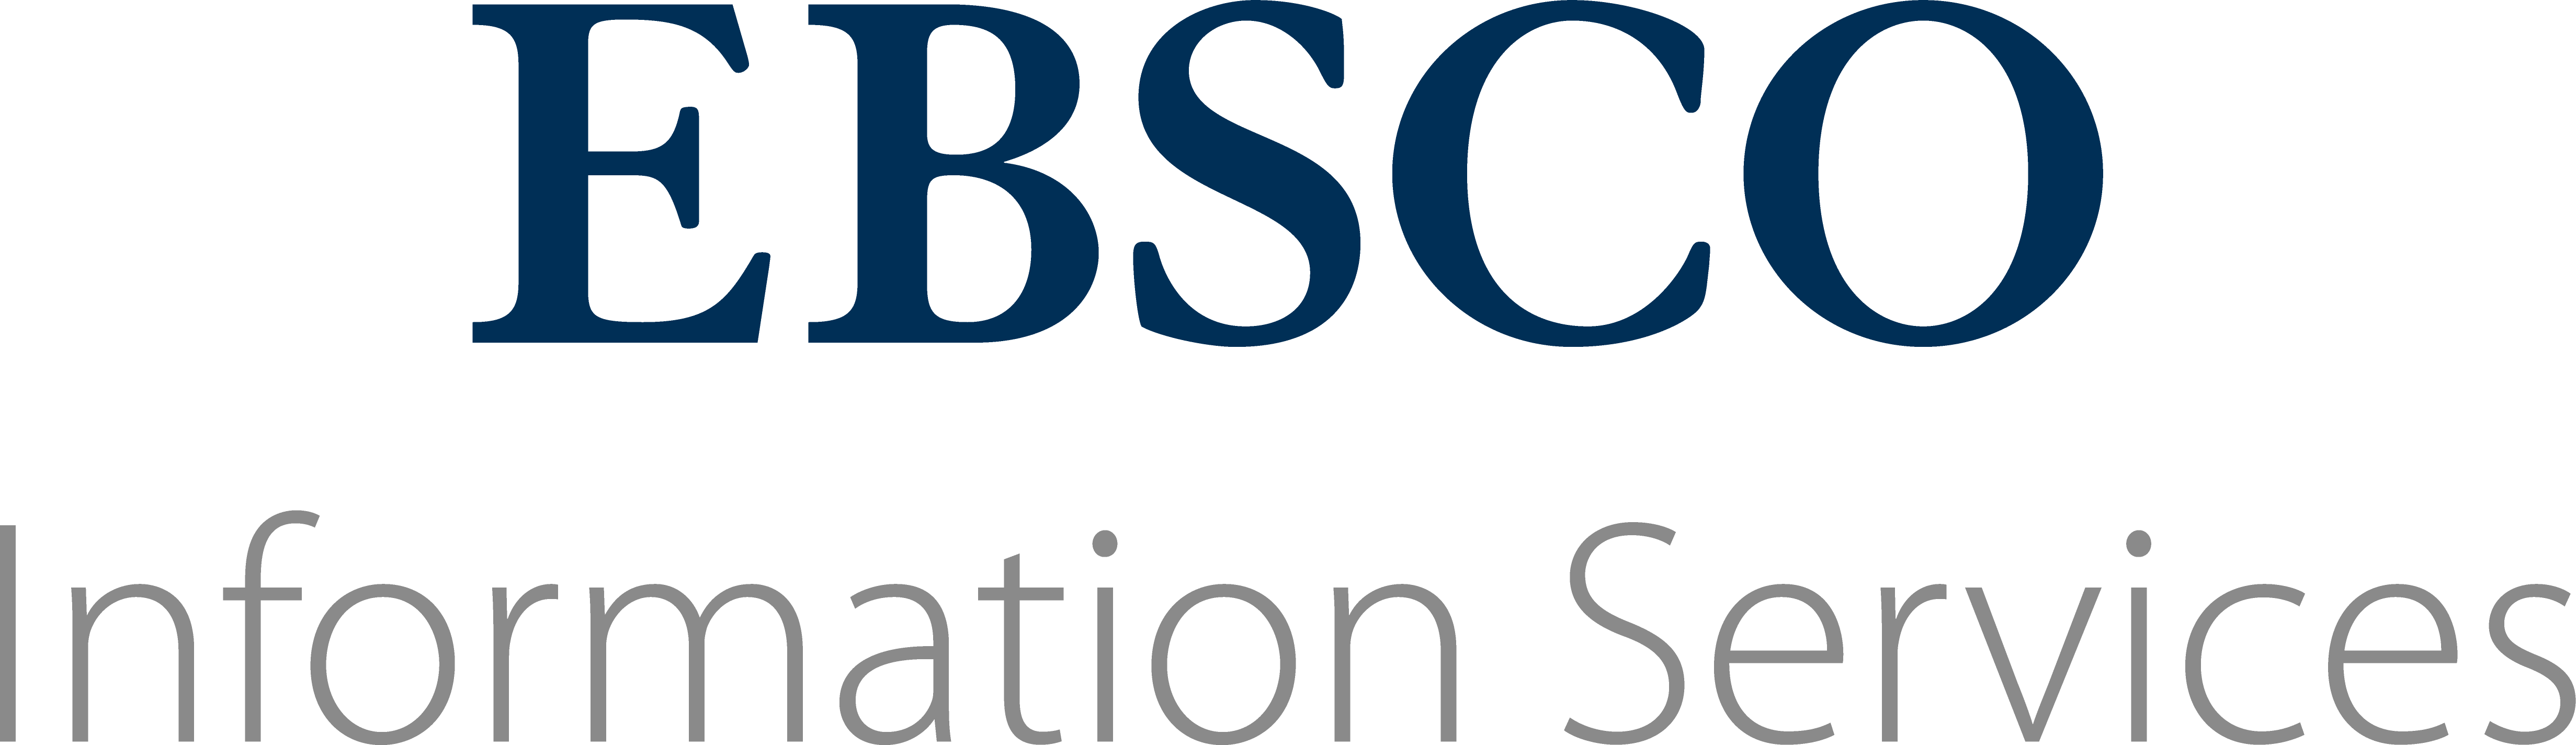 EBSCO Information Services_Logo_RGB_Stacked.png